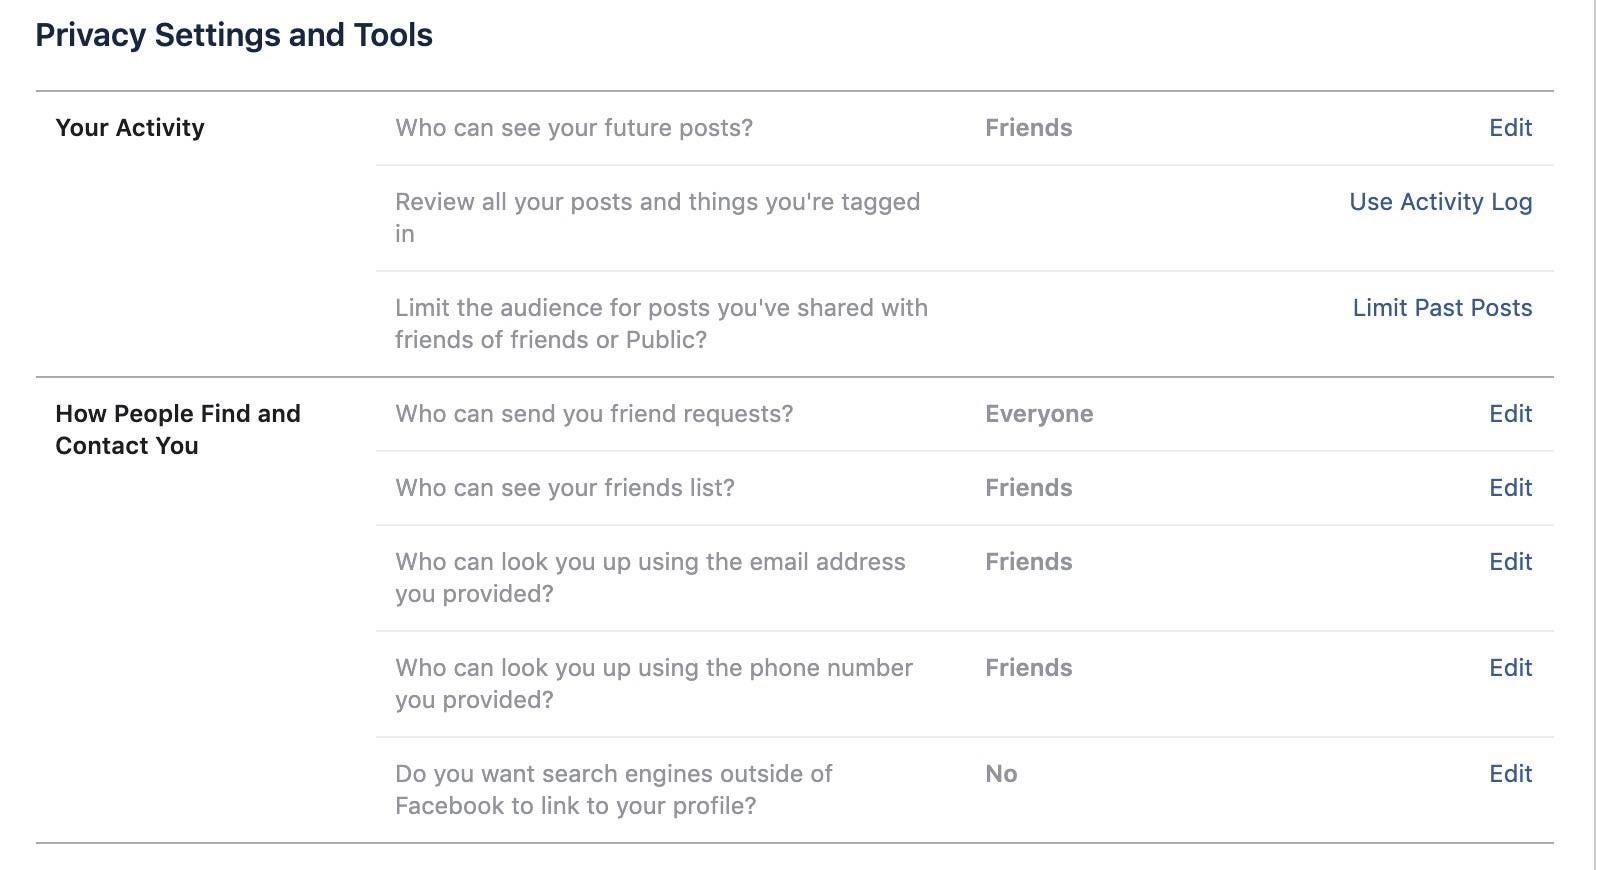 Privacy settings and tools